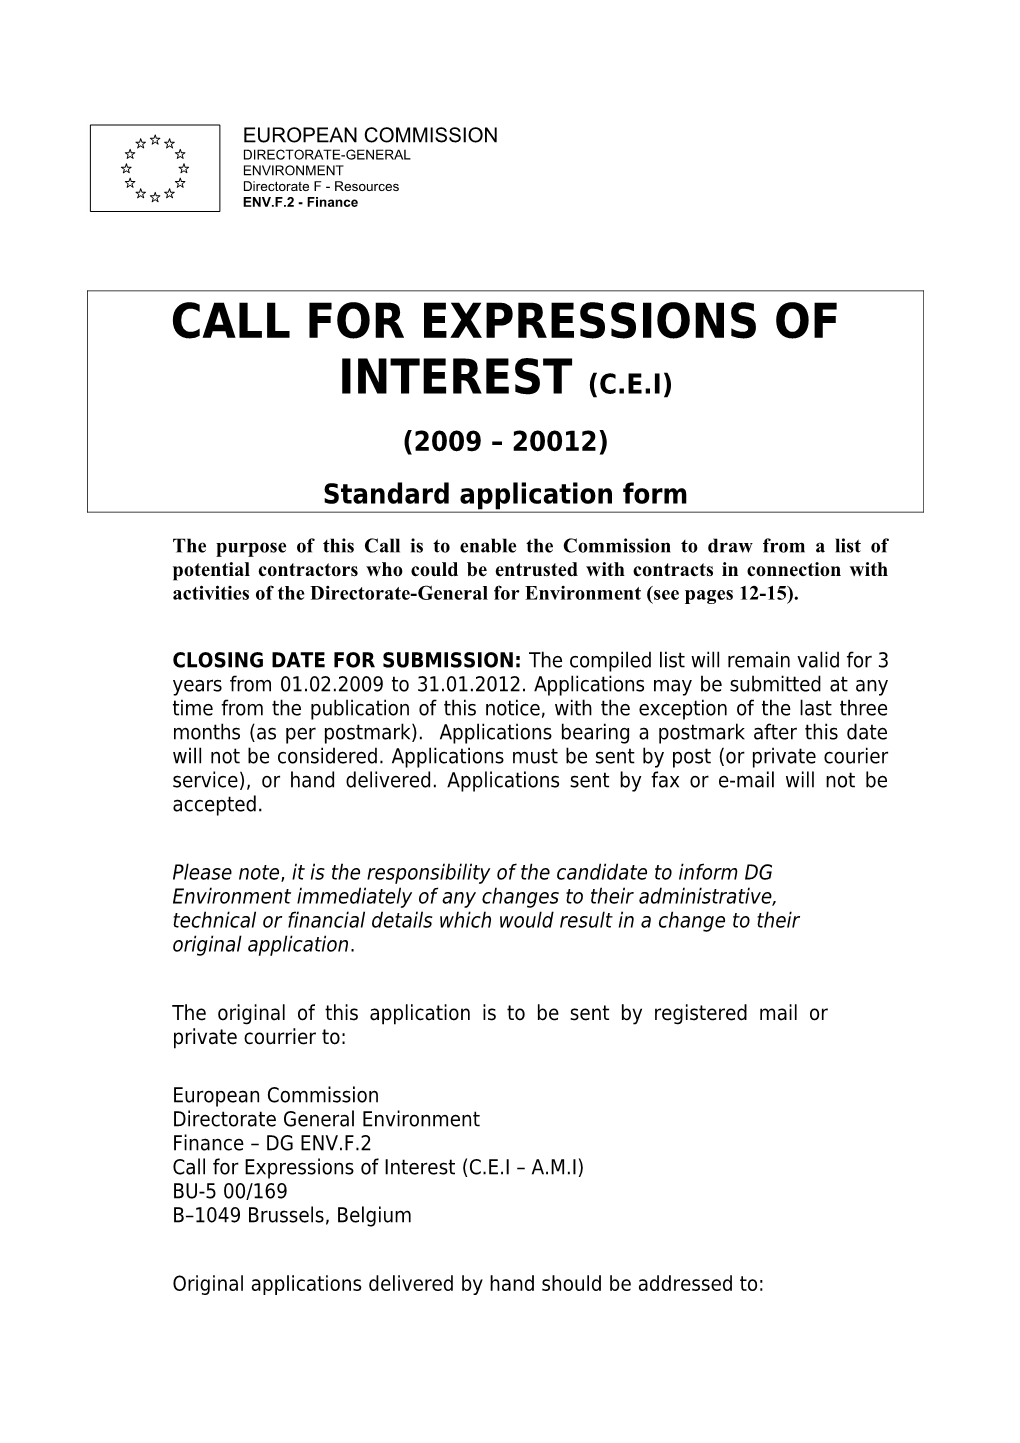 Call for Expressions of Interest (C.E.I)